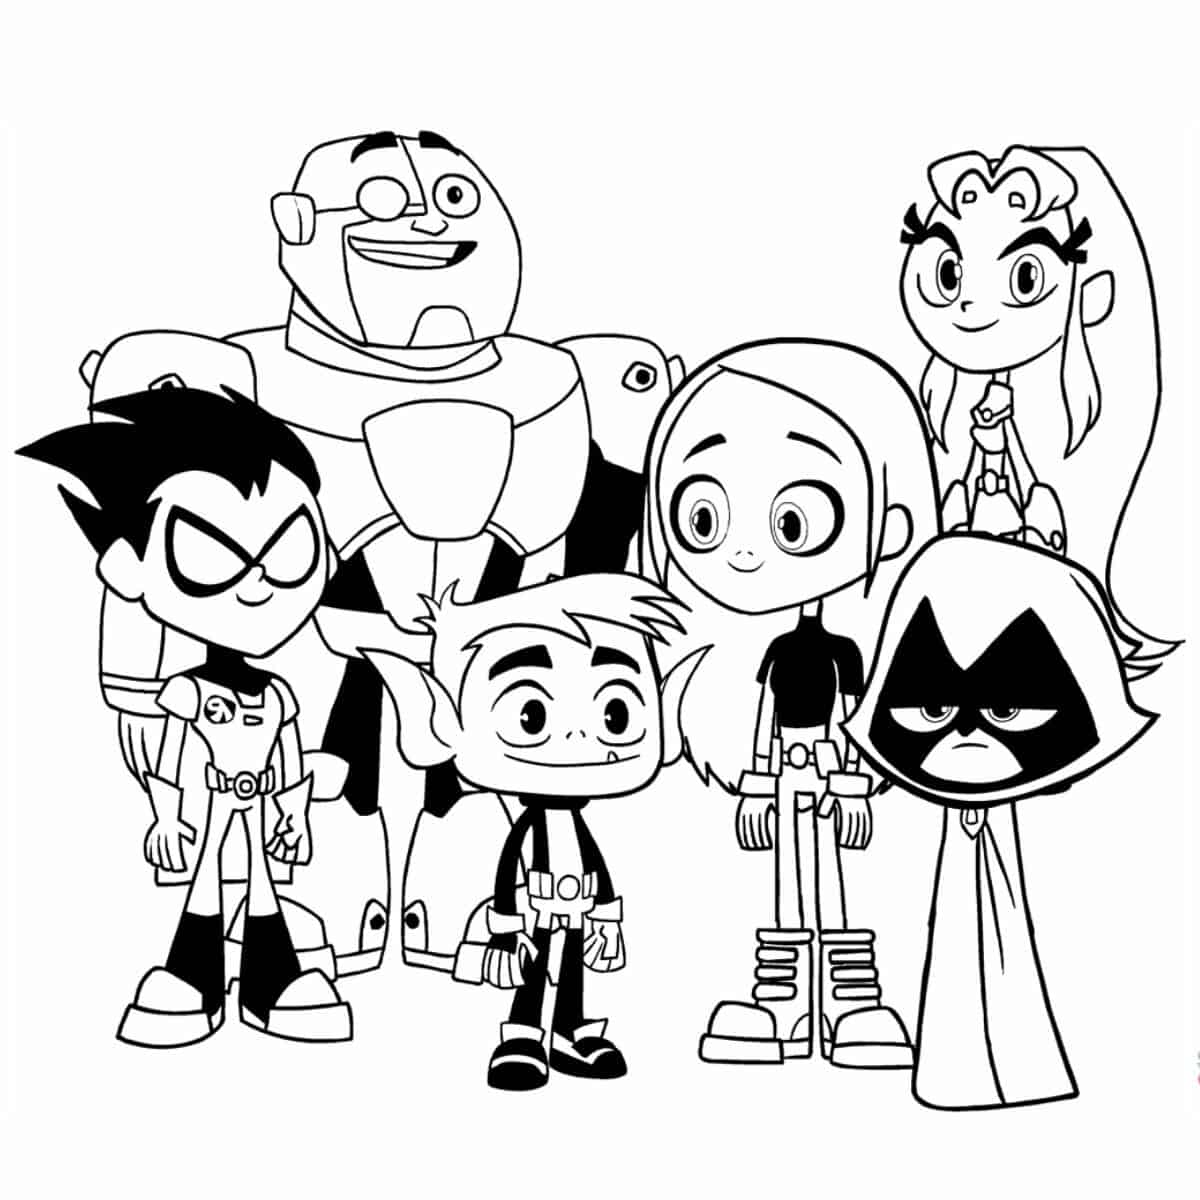 line drawing of the characters from teen titans go movie, to color